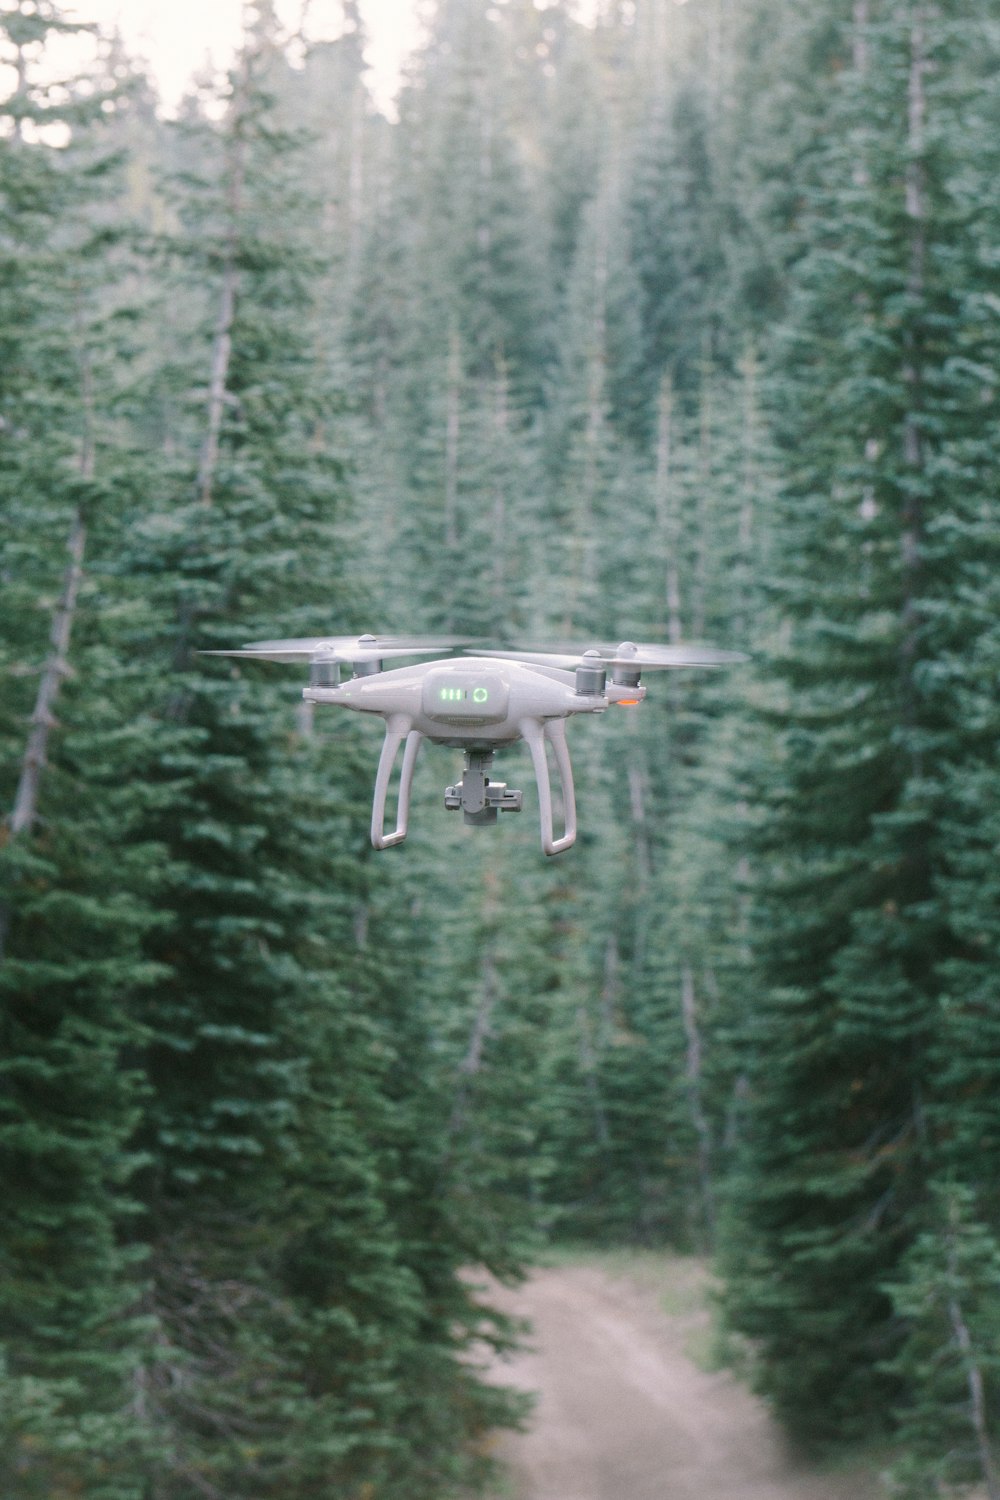 gray quadcopter drone in the middle of forest during day